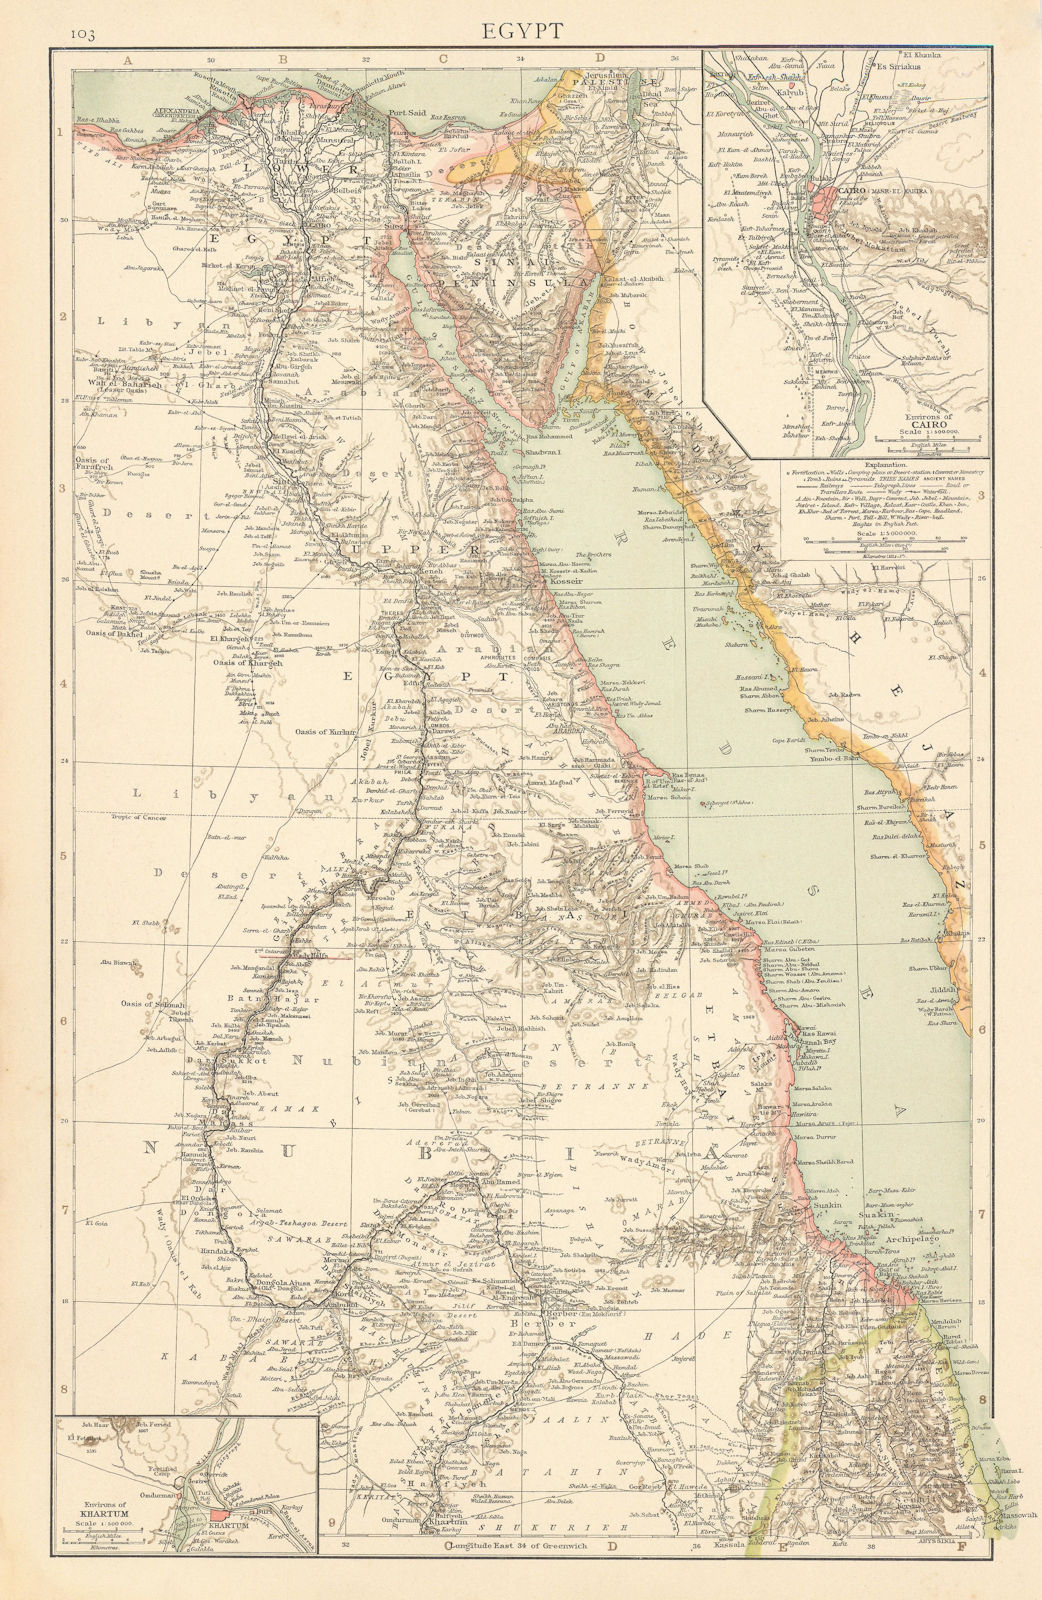 Egypt. Nile Valley. Khartoum & Cairo environs. Red Sea. THE TIMES 1895 old map